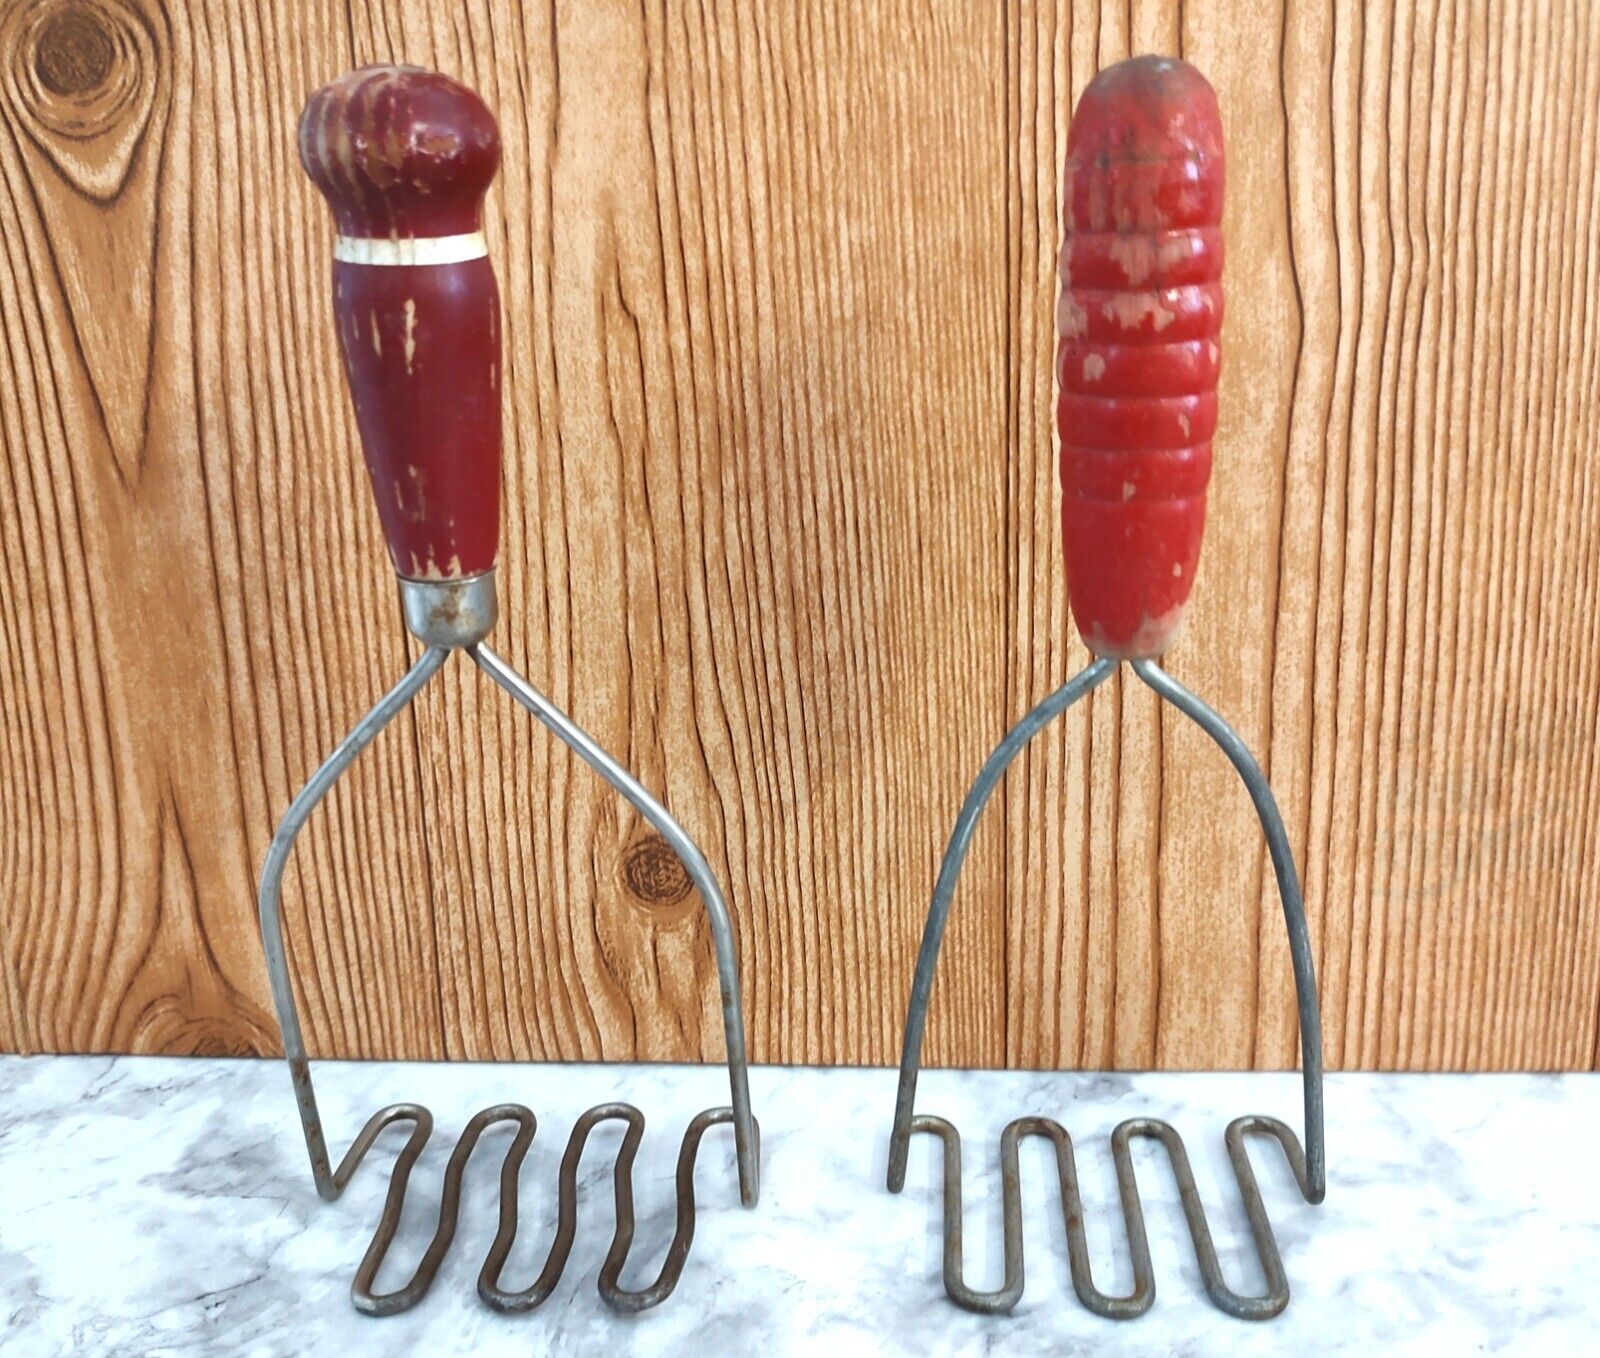 Primary image for Vtg Red Wood Handle Potato Masher Set of Two 1930s - 60s Kitchen Utensils